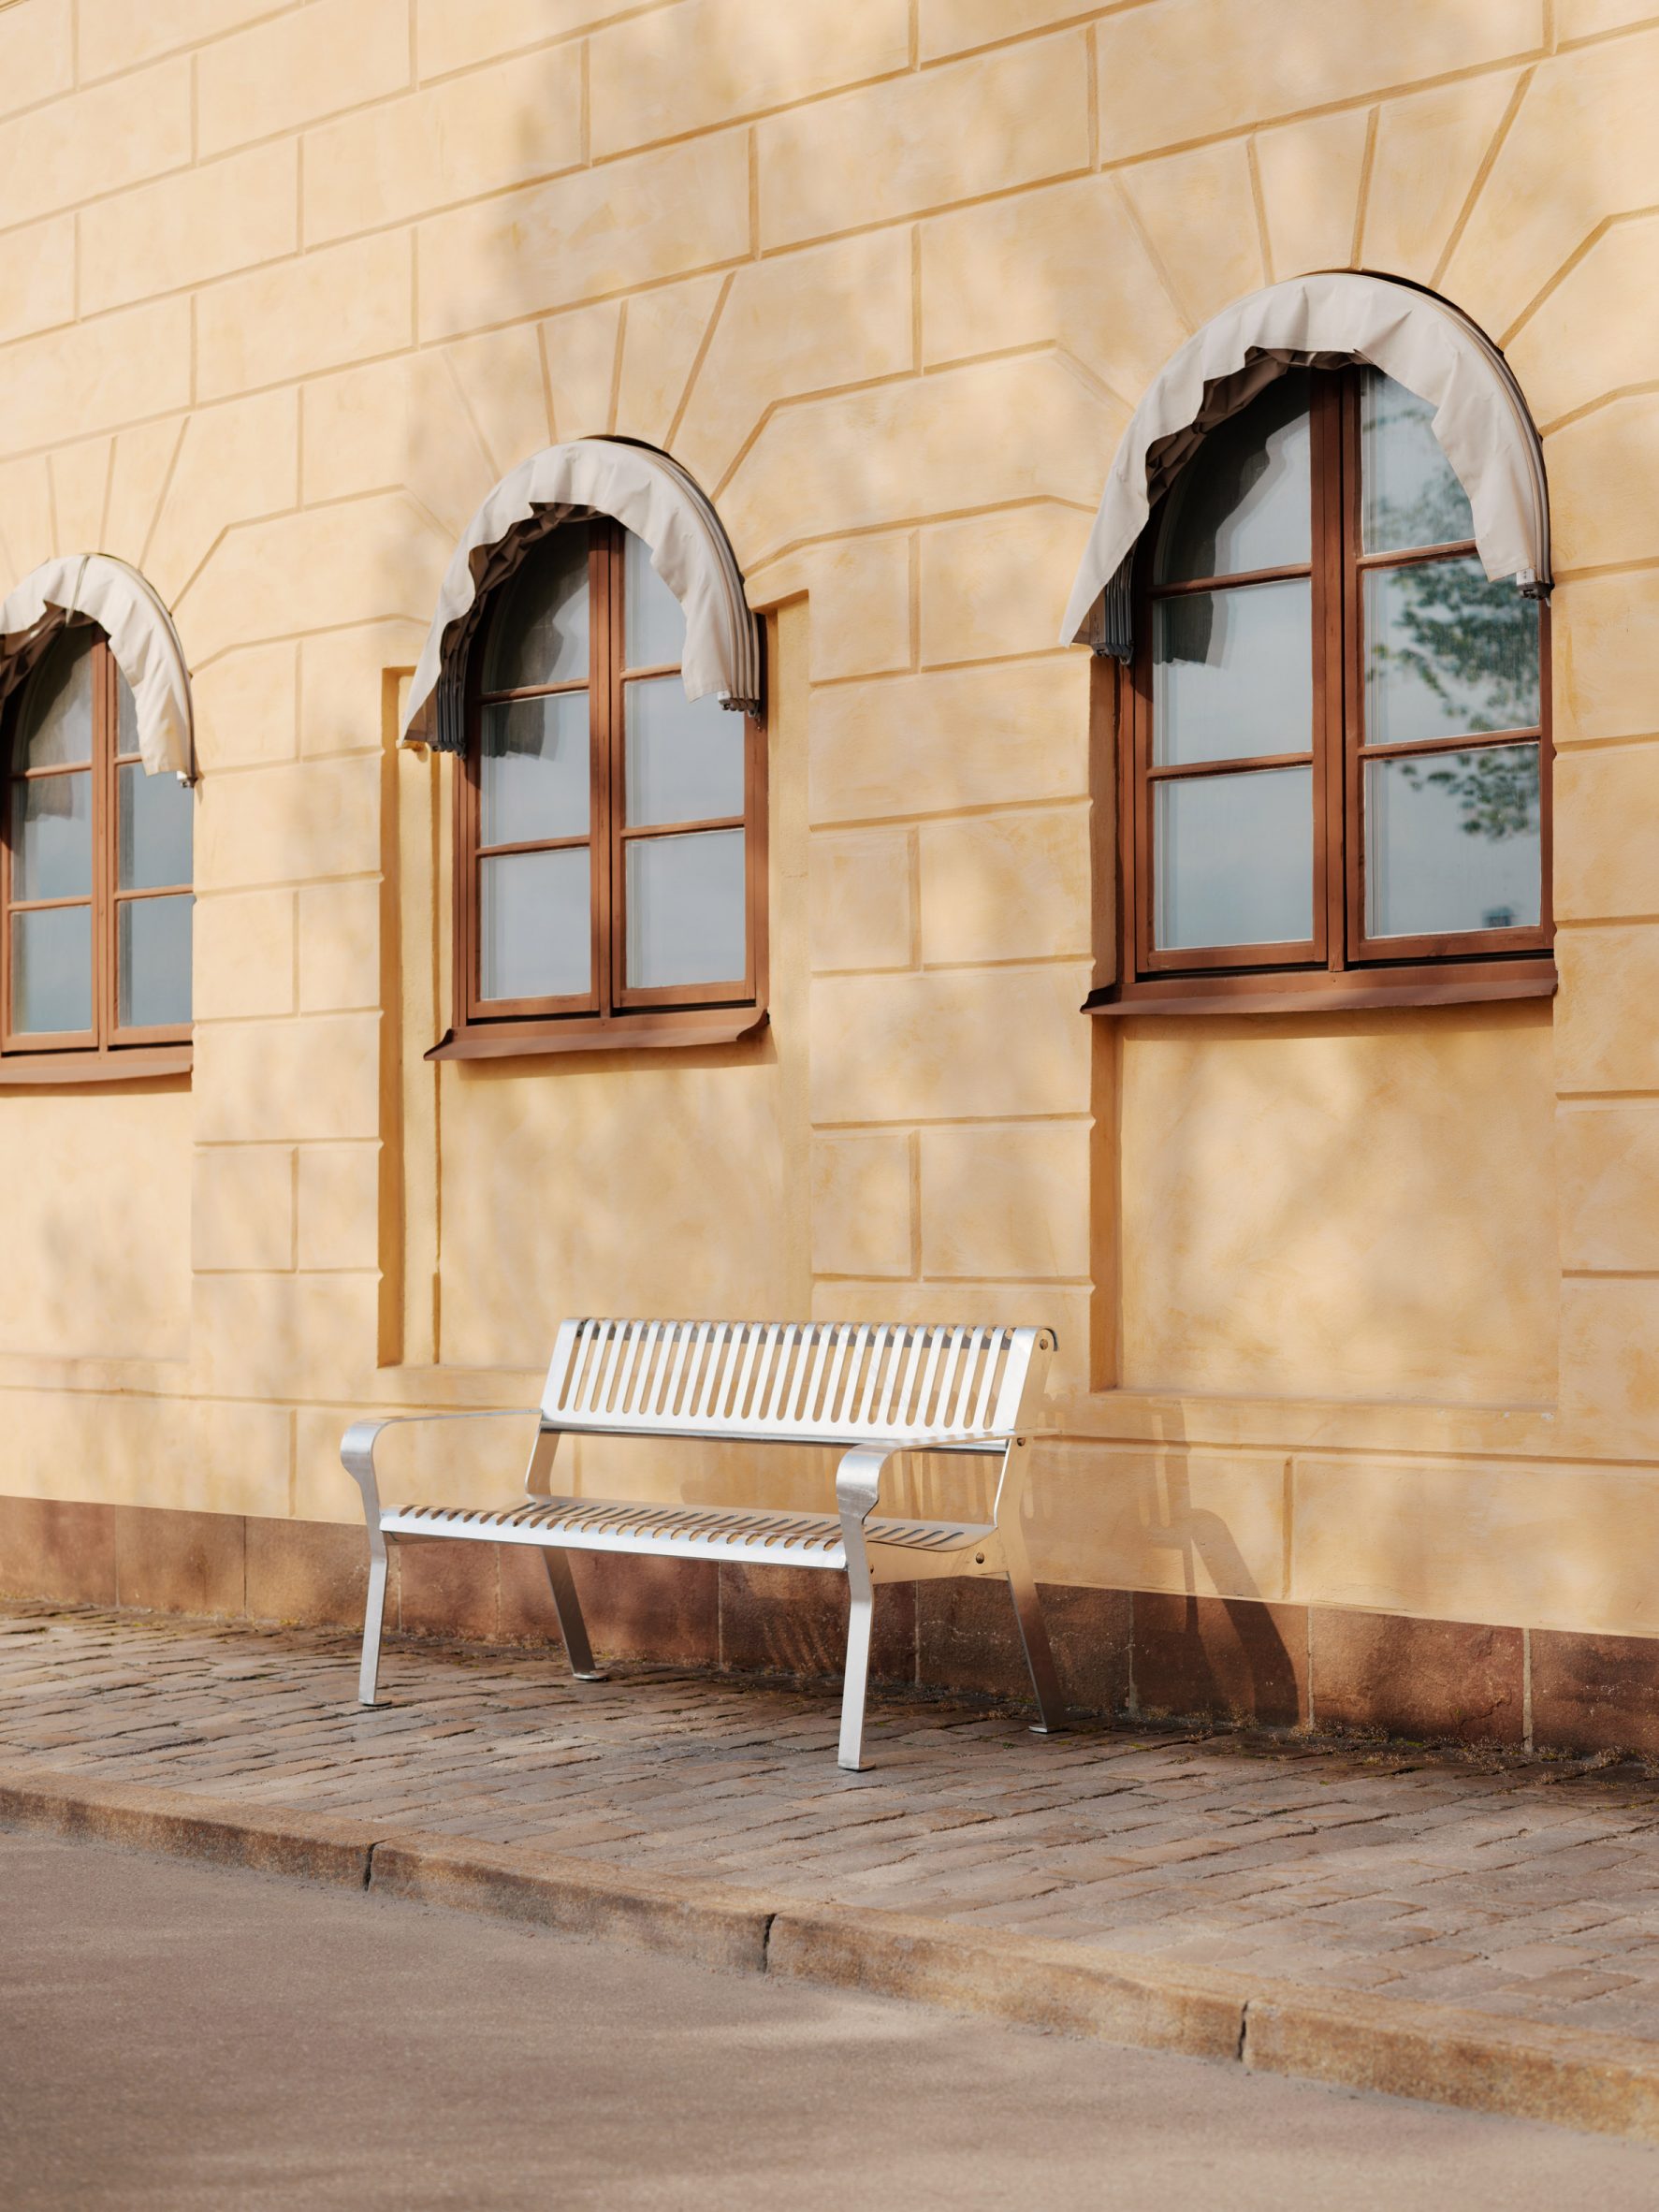 Photo of a lightweight steel bench on the street of a European city against an old building